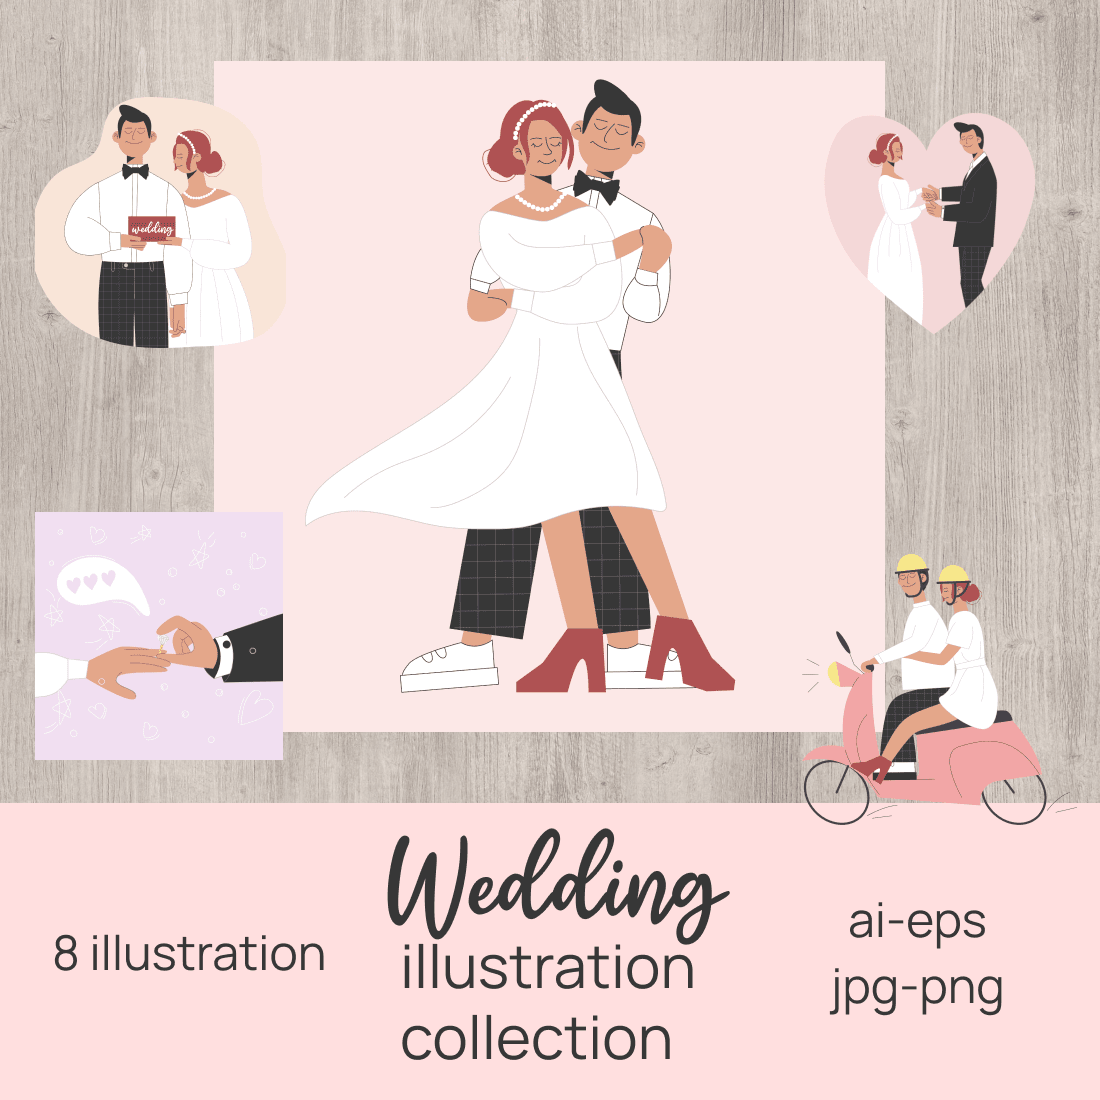 Collection of Wedding Illustration cover image.